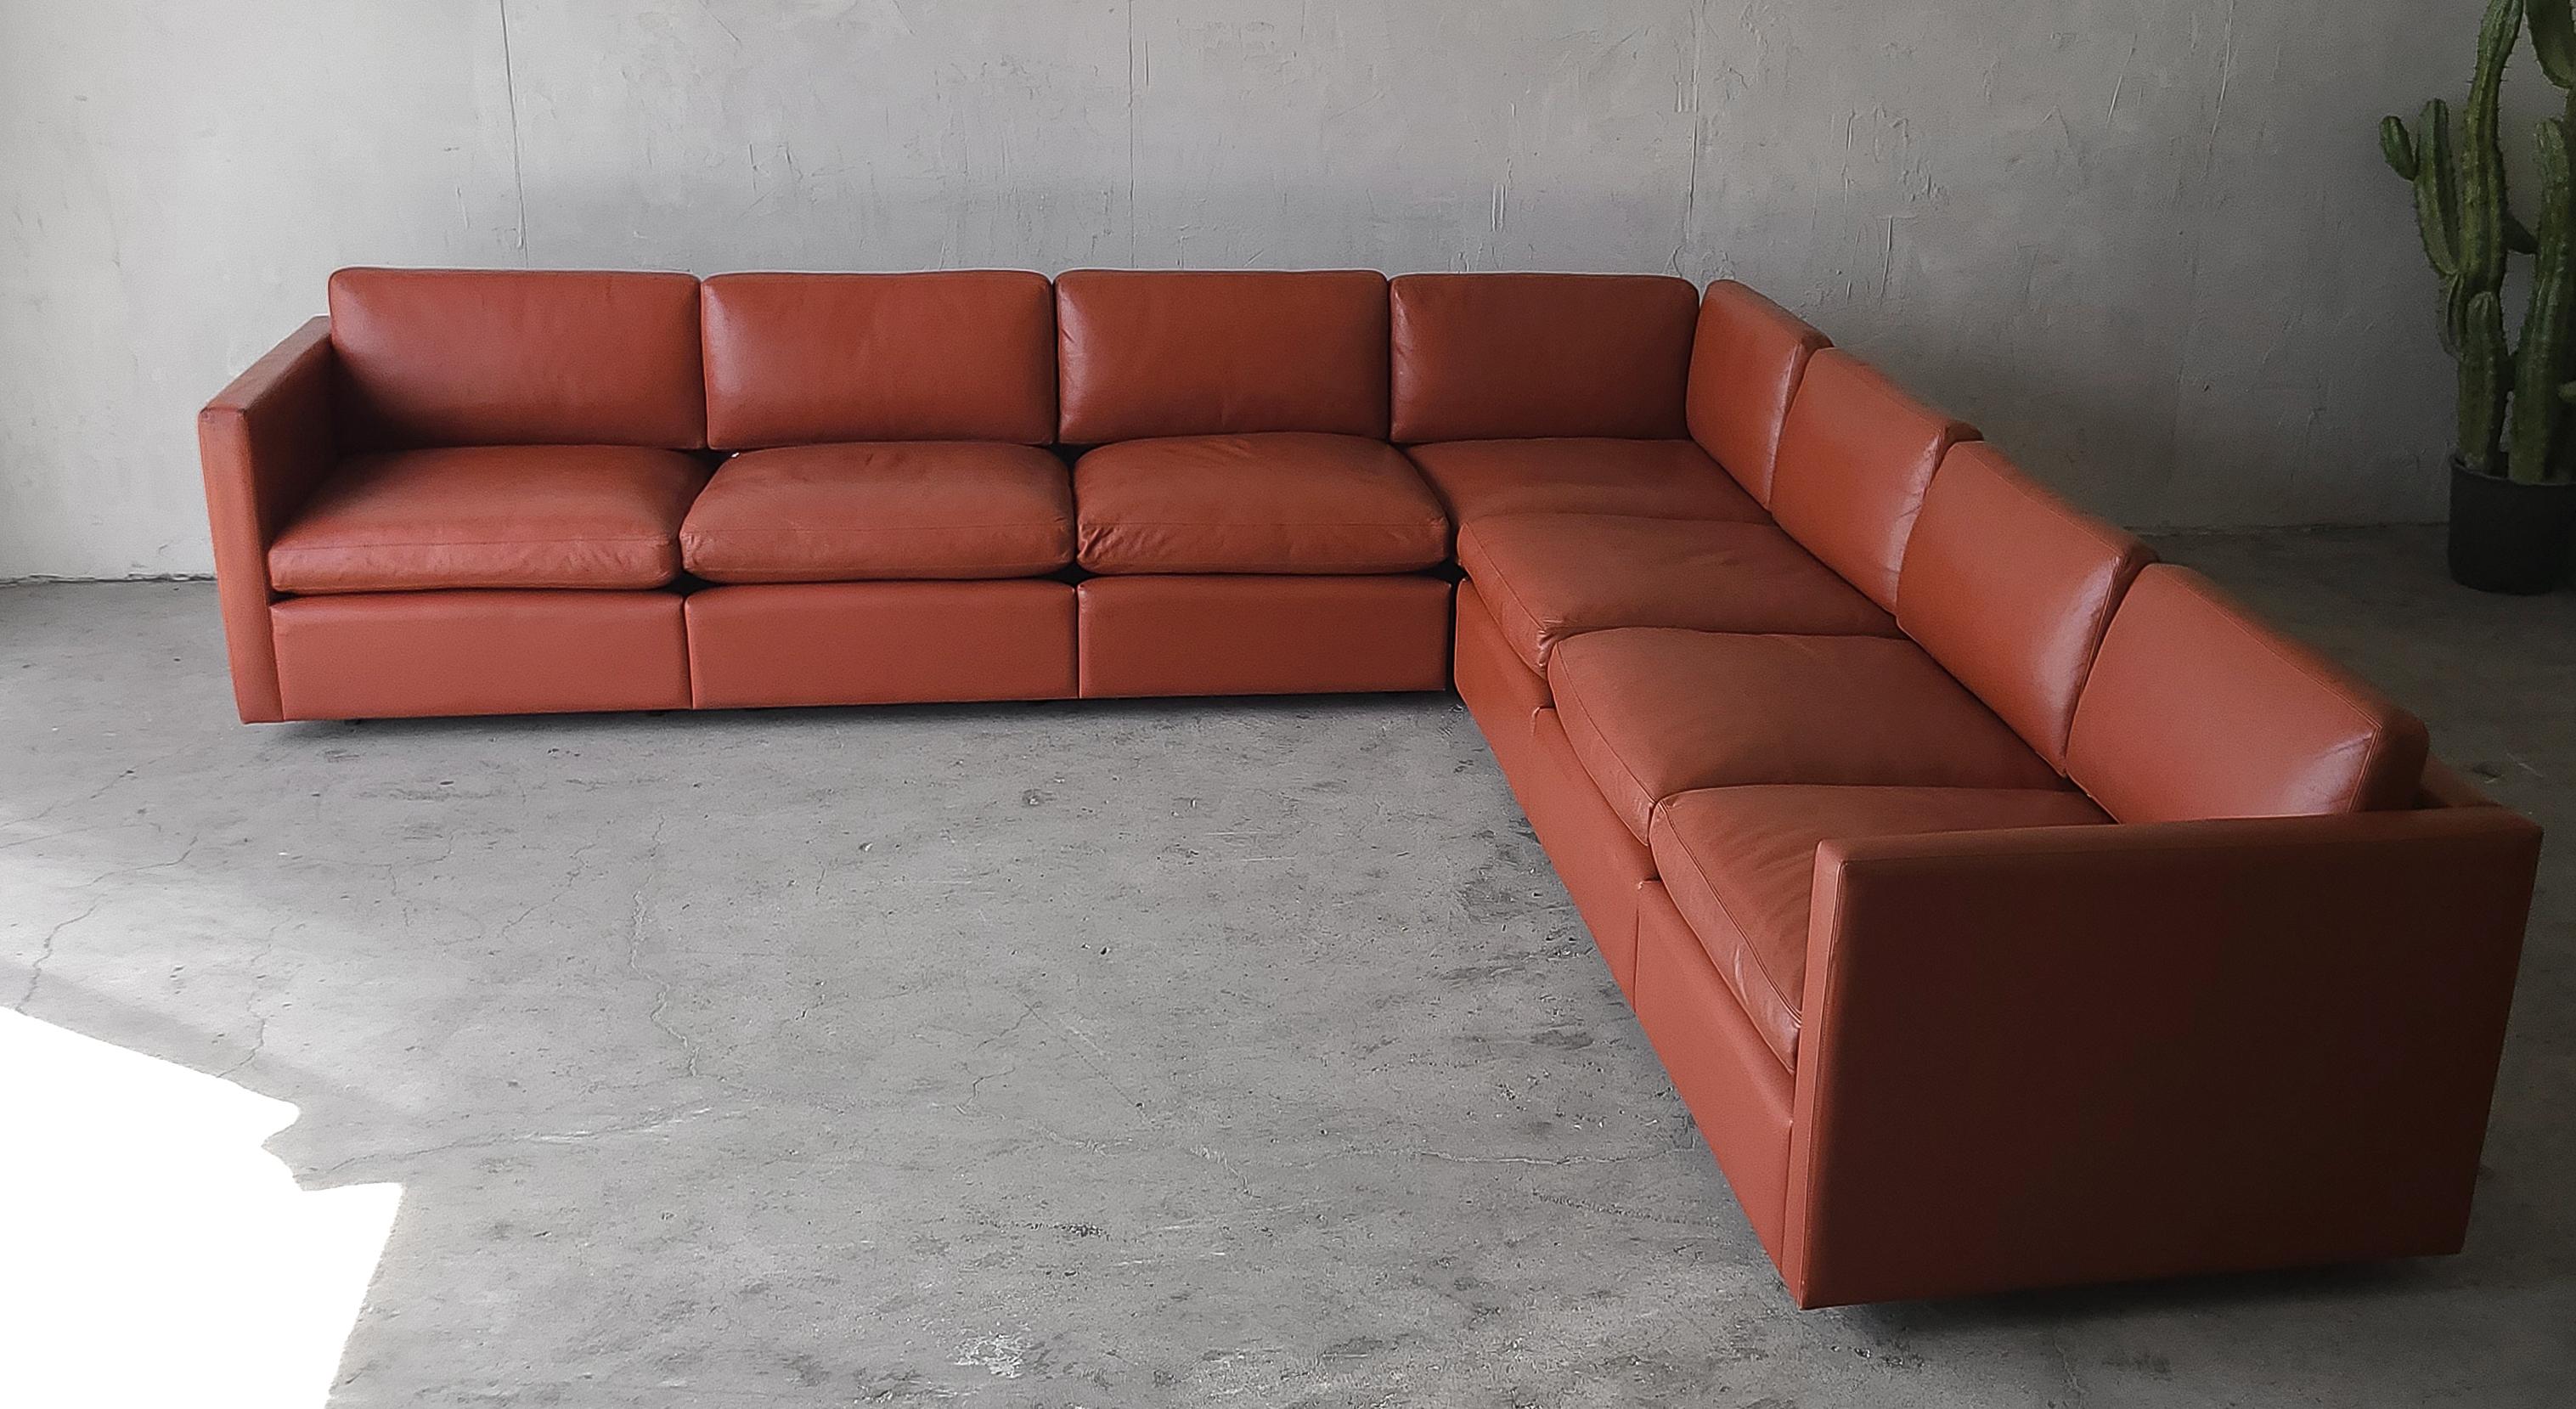 All original modular sectional sofa designed by Charles Pfister for Knoll.  Comprised of 7 pieces that can be configured several ways for layout flexibility within different spaces.  Sofa is RARE vintage leather with down cushions.

The sofa is in